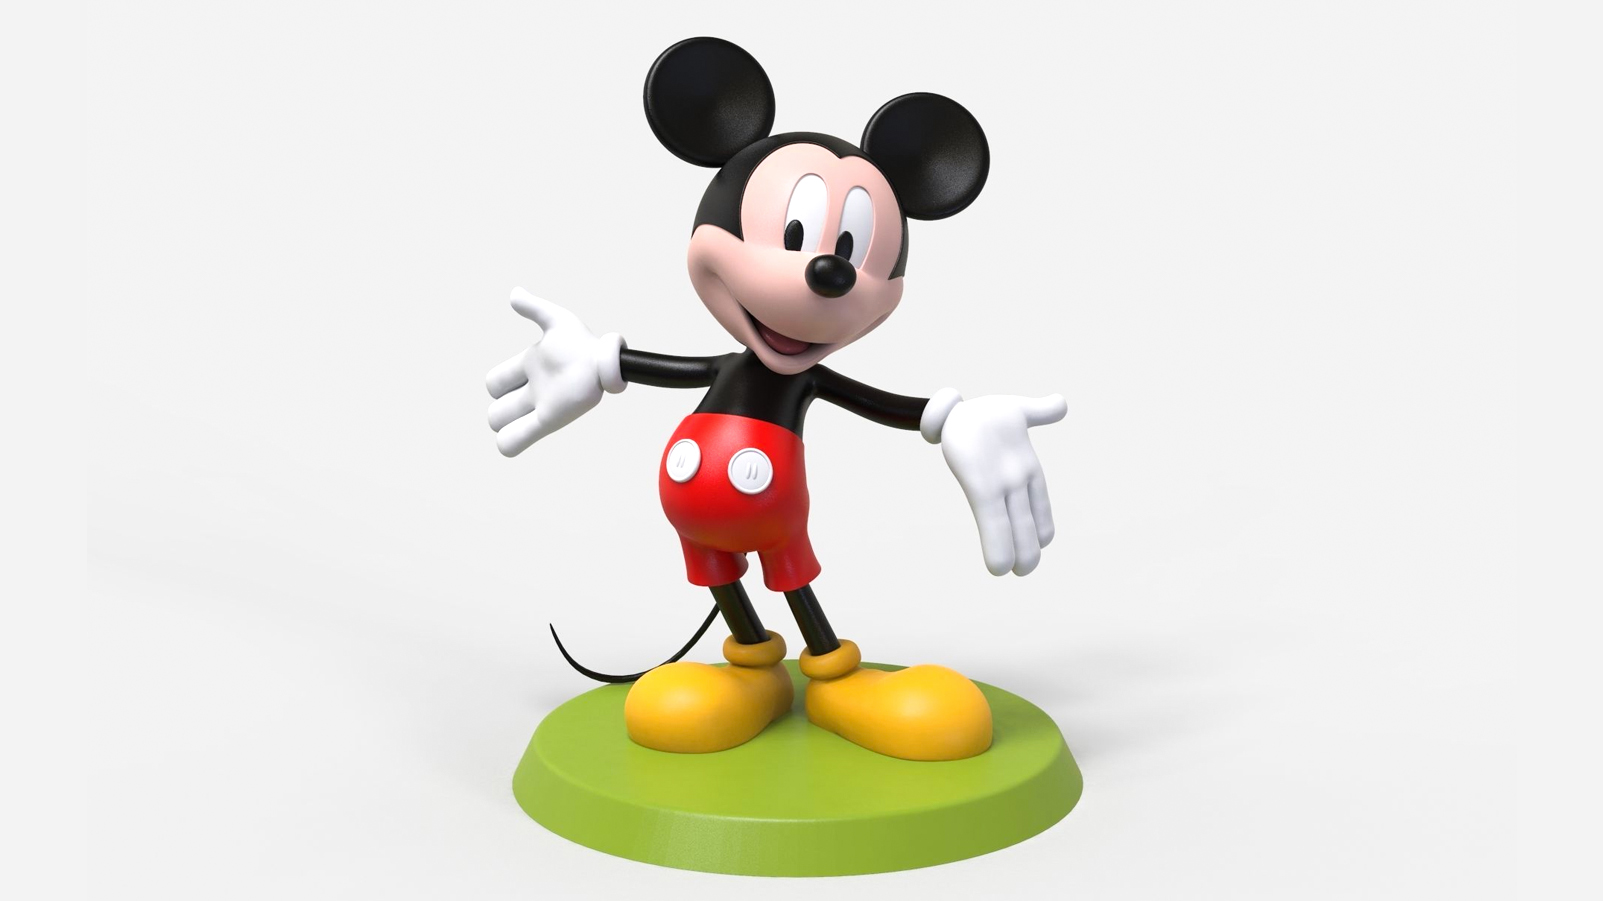 https://i.all3dp.com/wp-content/uploads/2022/02/23140855/3D-print-model-mickey-mouse-from-CGtrader.jpg